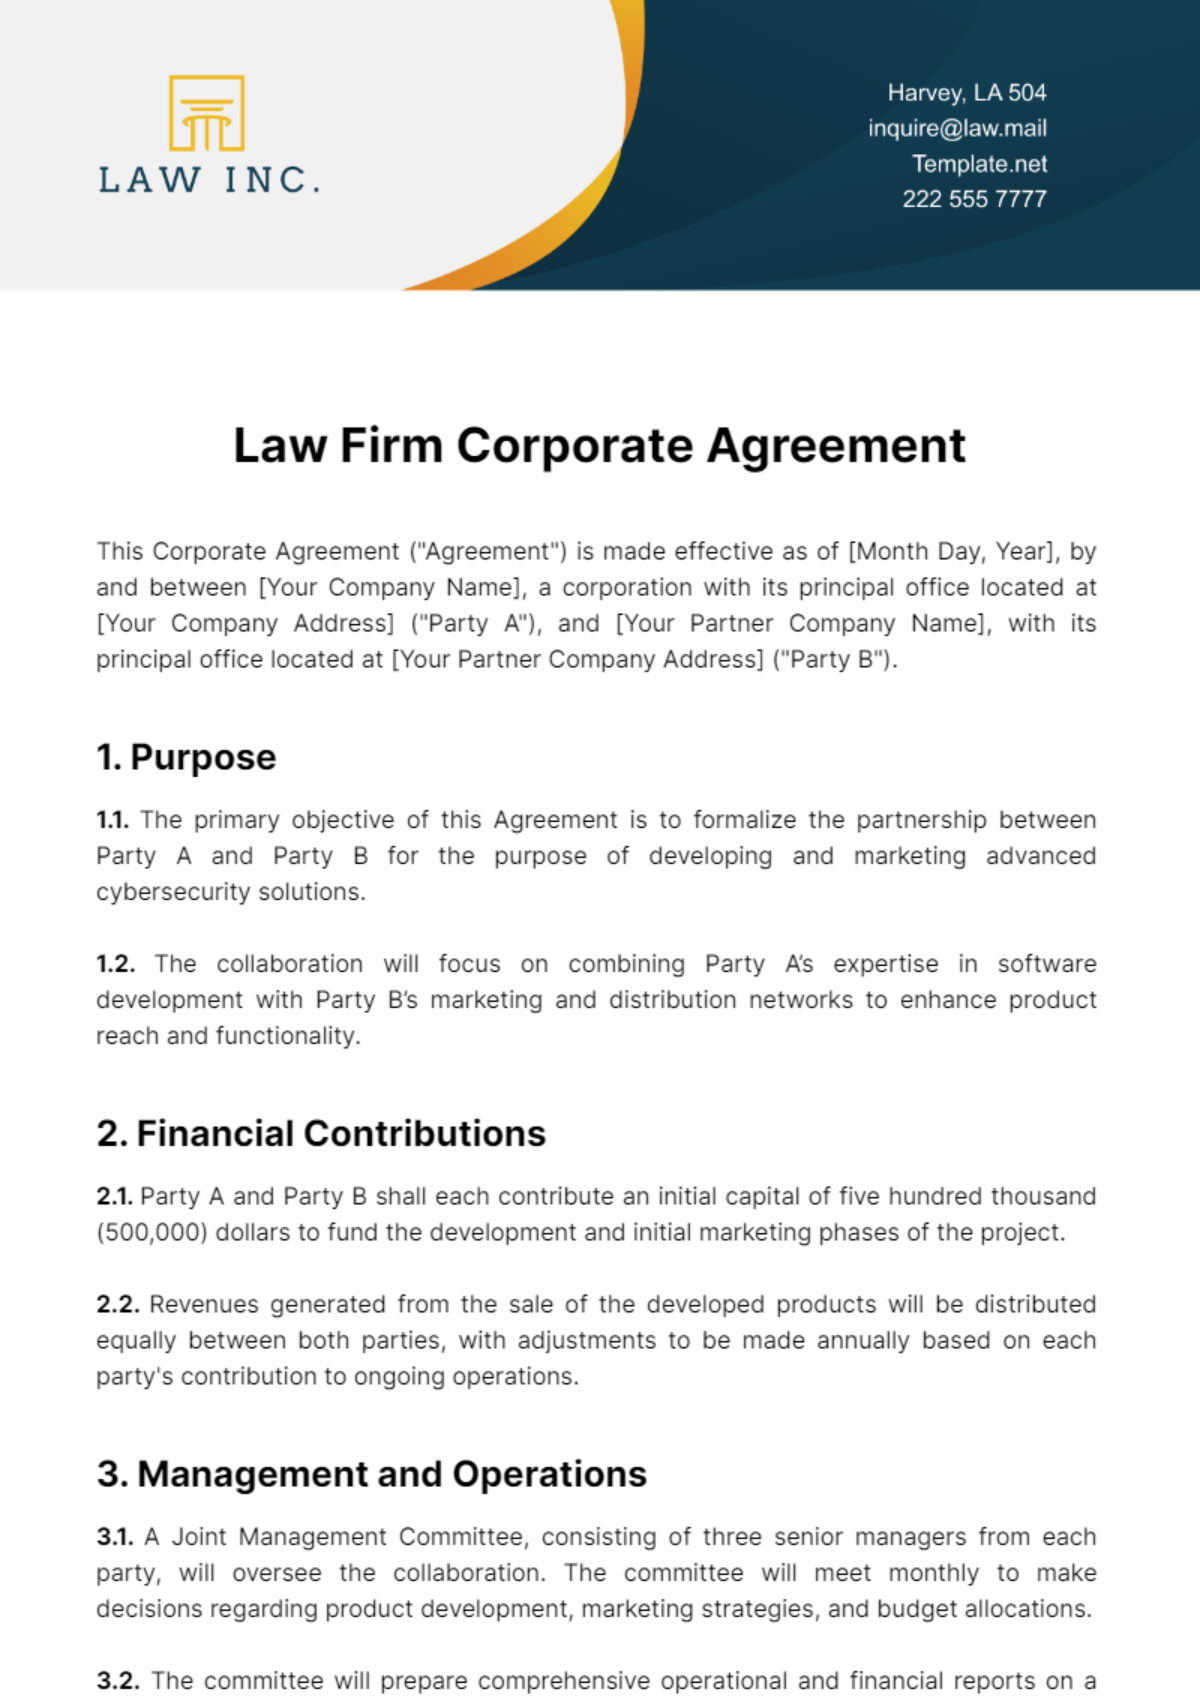 Free Law Firm Corporate Agreement Template